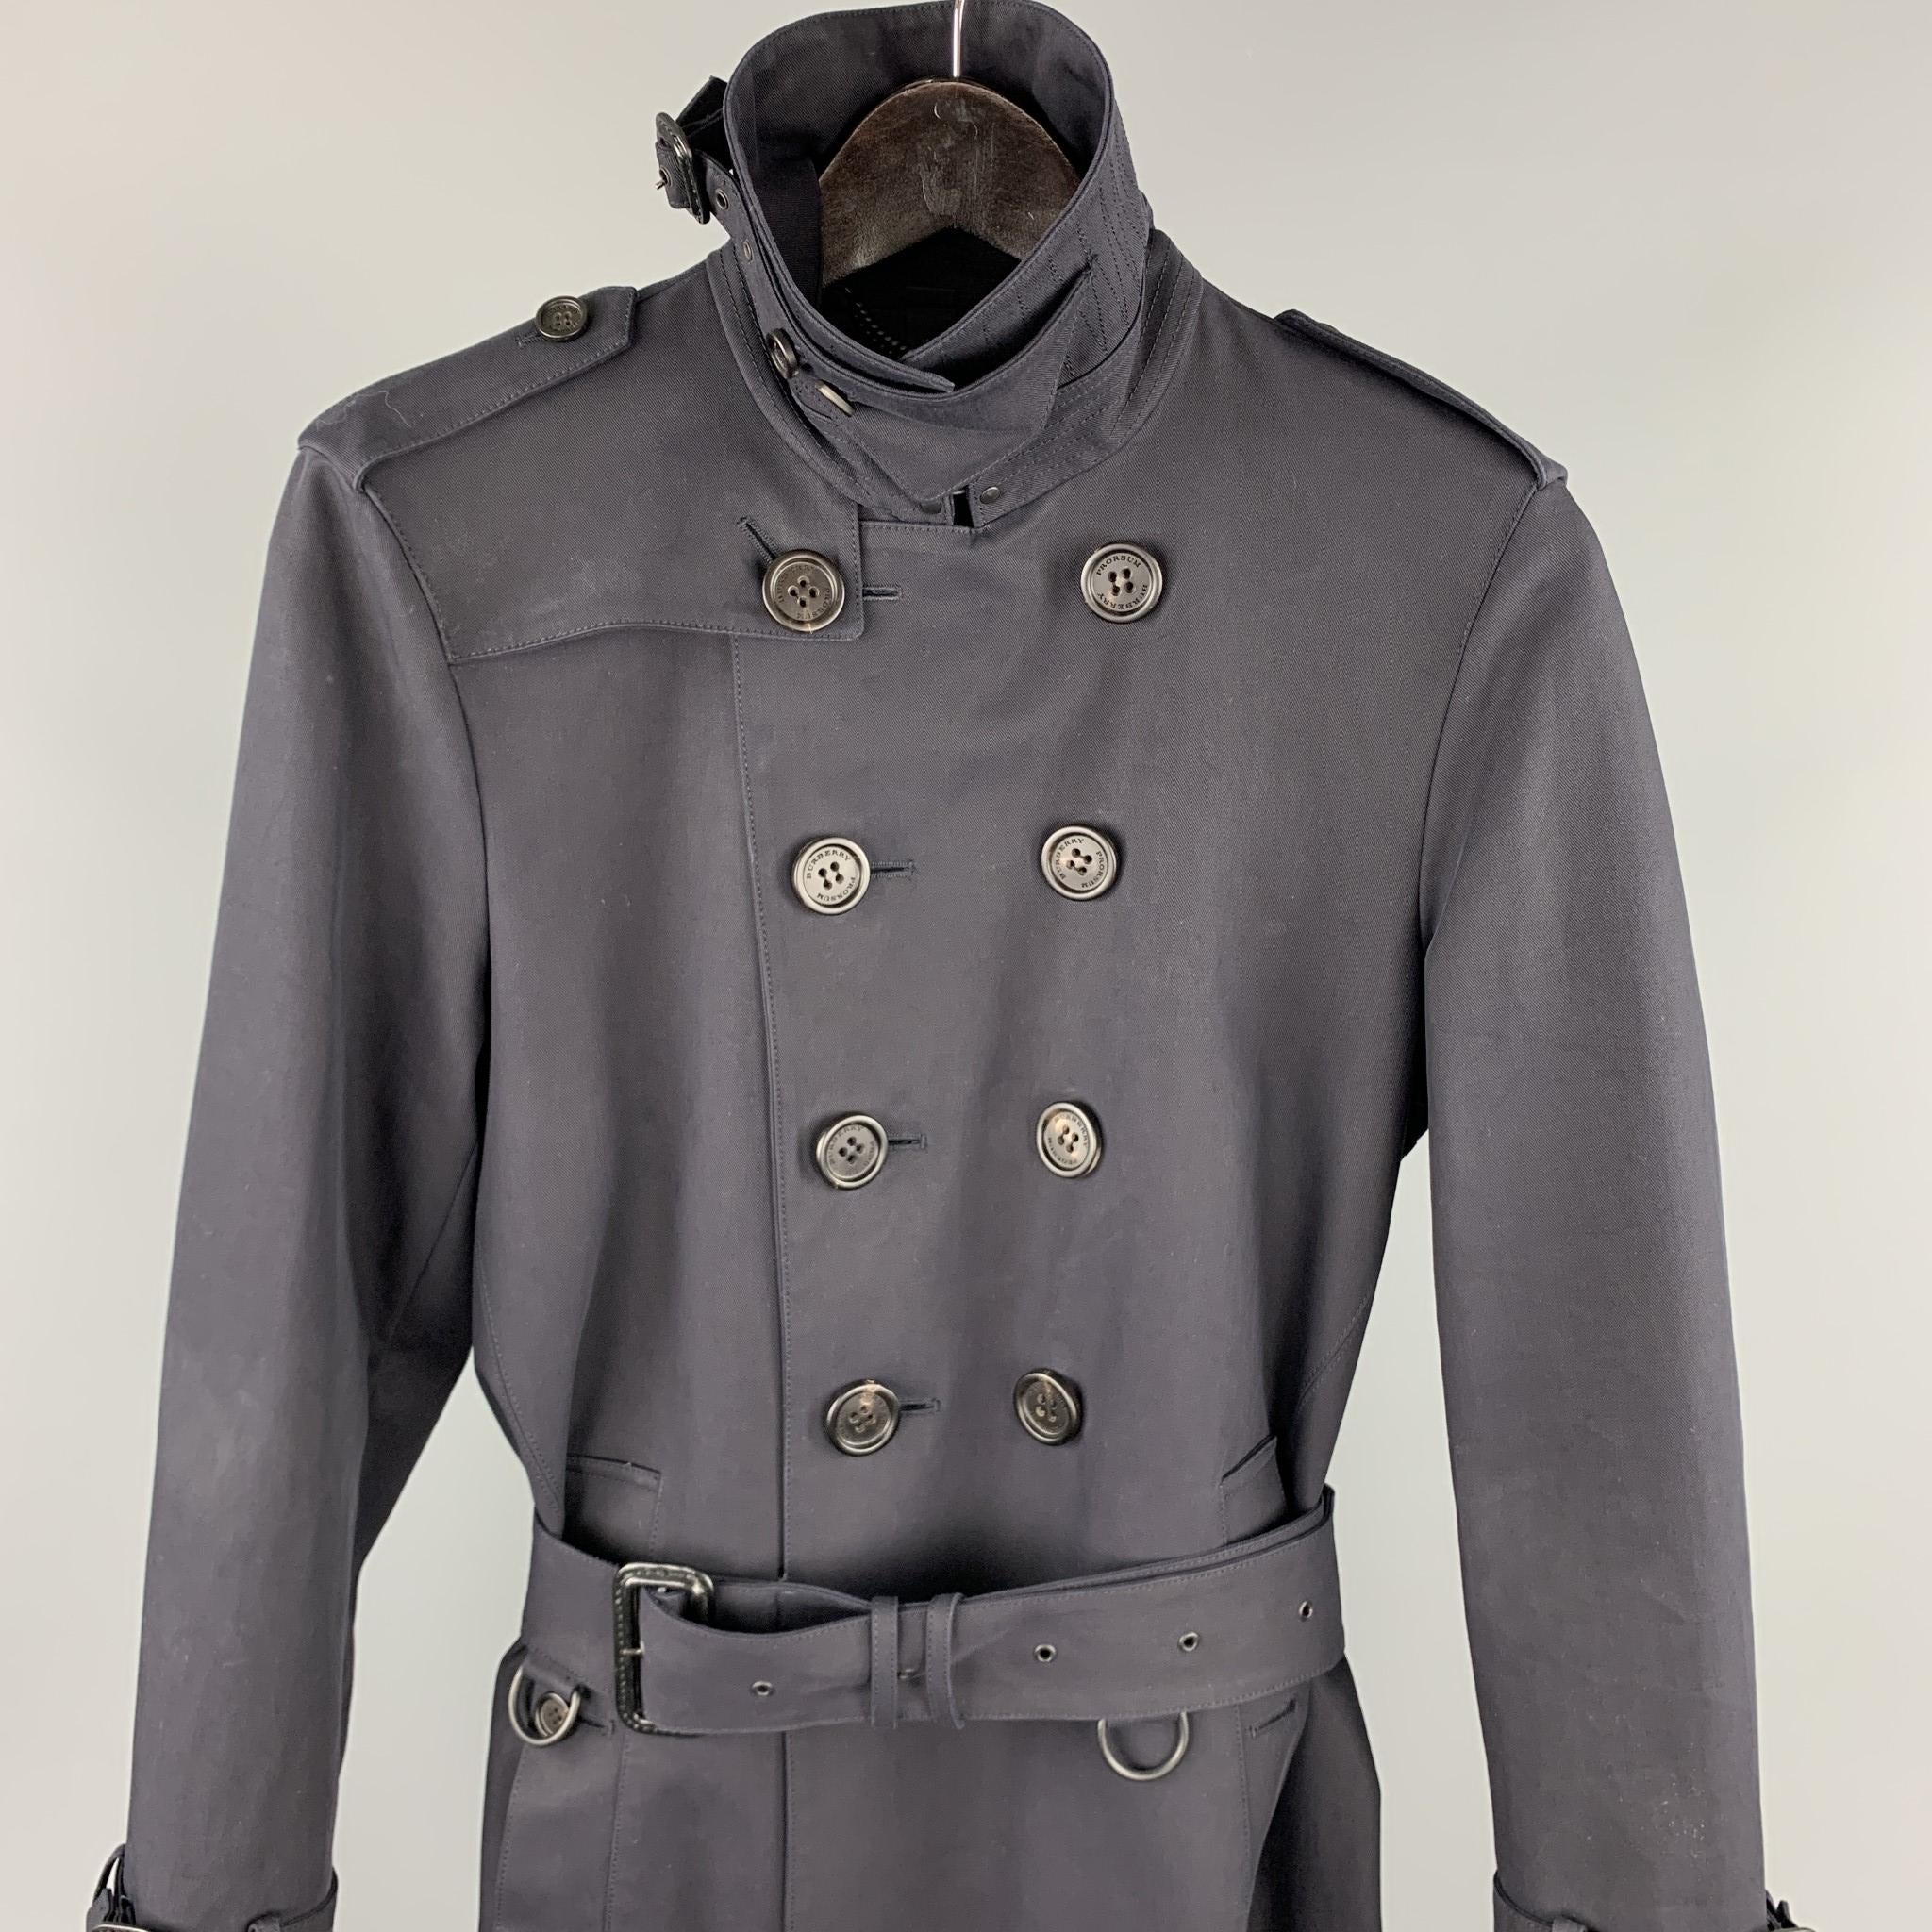 BURBERRY PRORSUM trench coat comes in a navy cotton with a full black monogram print liner featuring a belted style, high collar design, epaulettes, belted sleeve details, hook & eye, back vent, and a double breasted closure. Comes with dust bag.